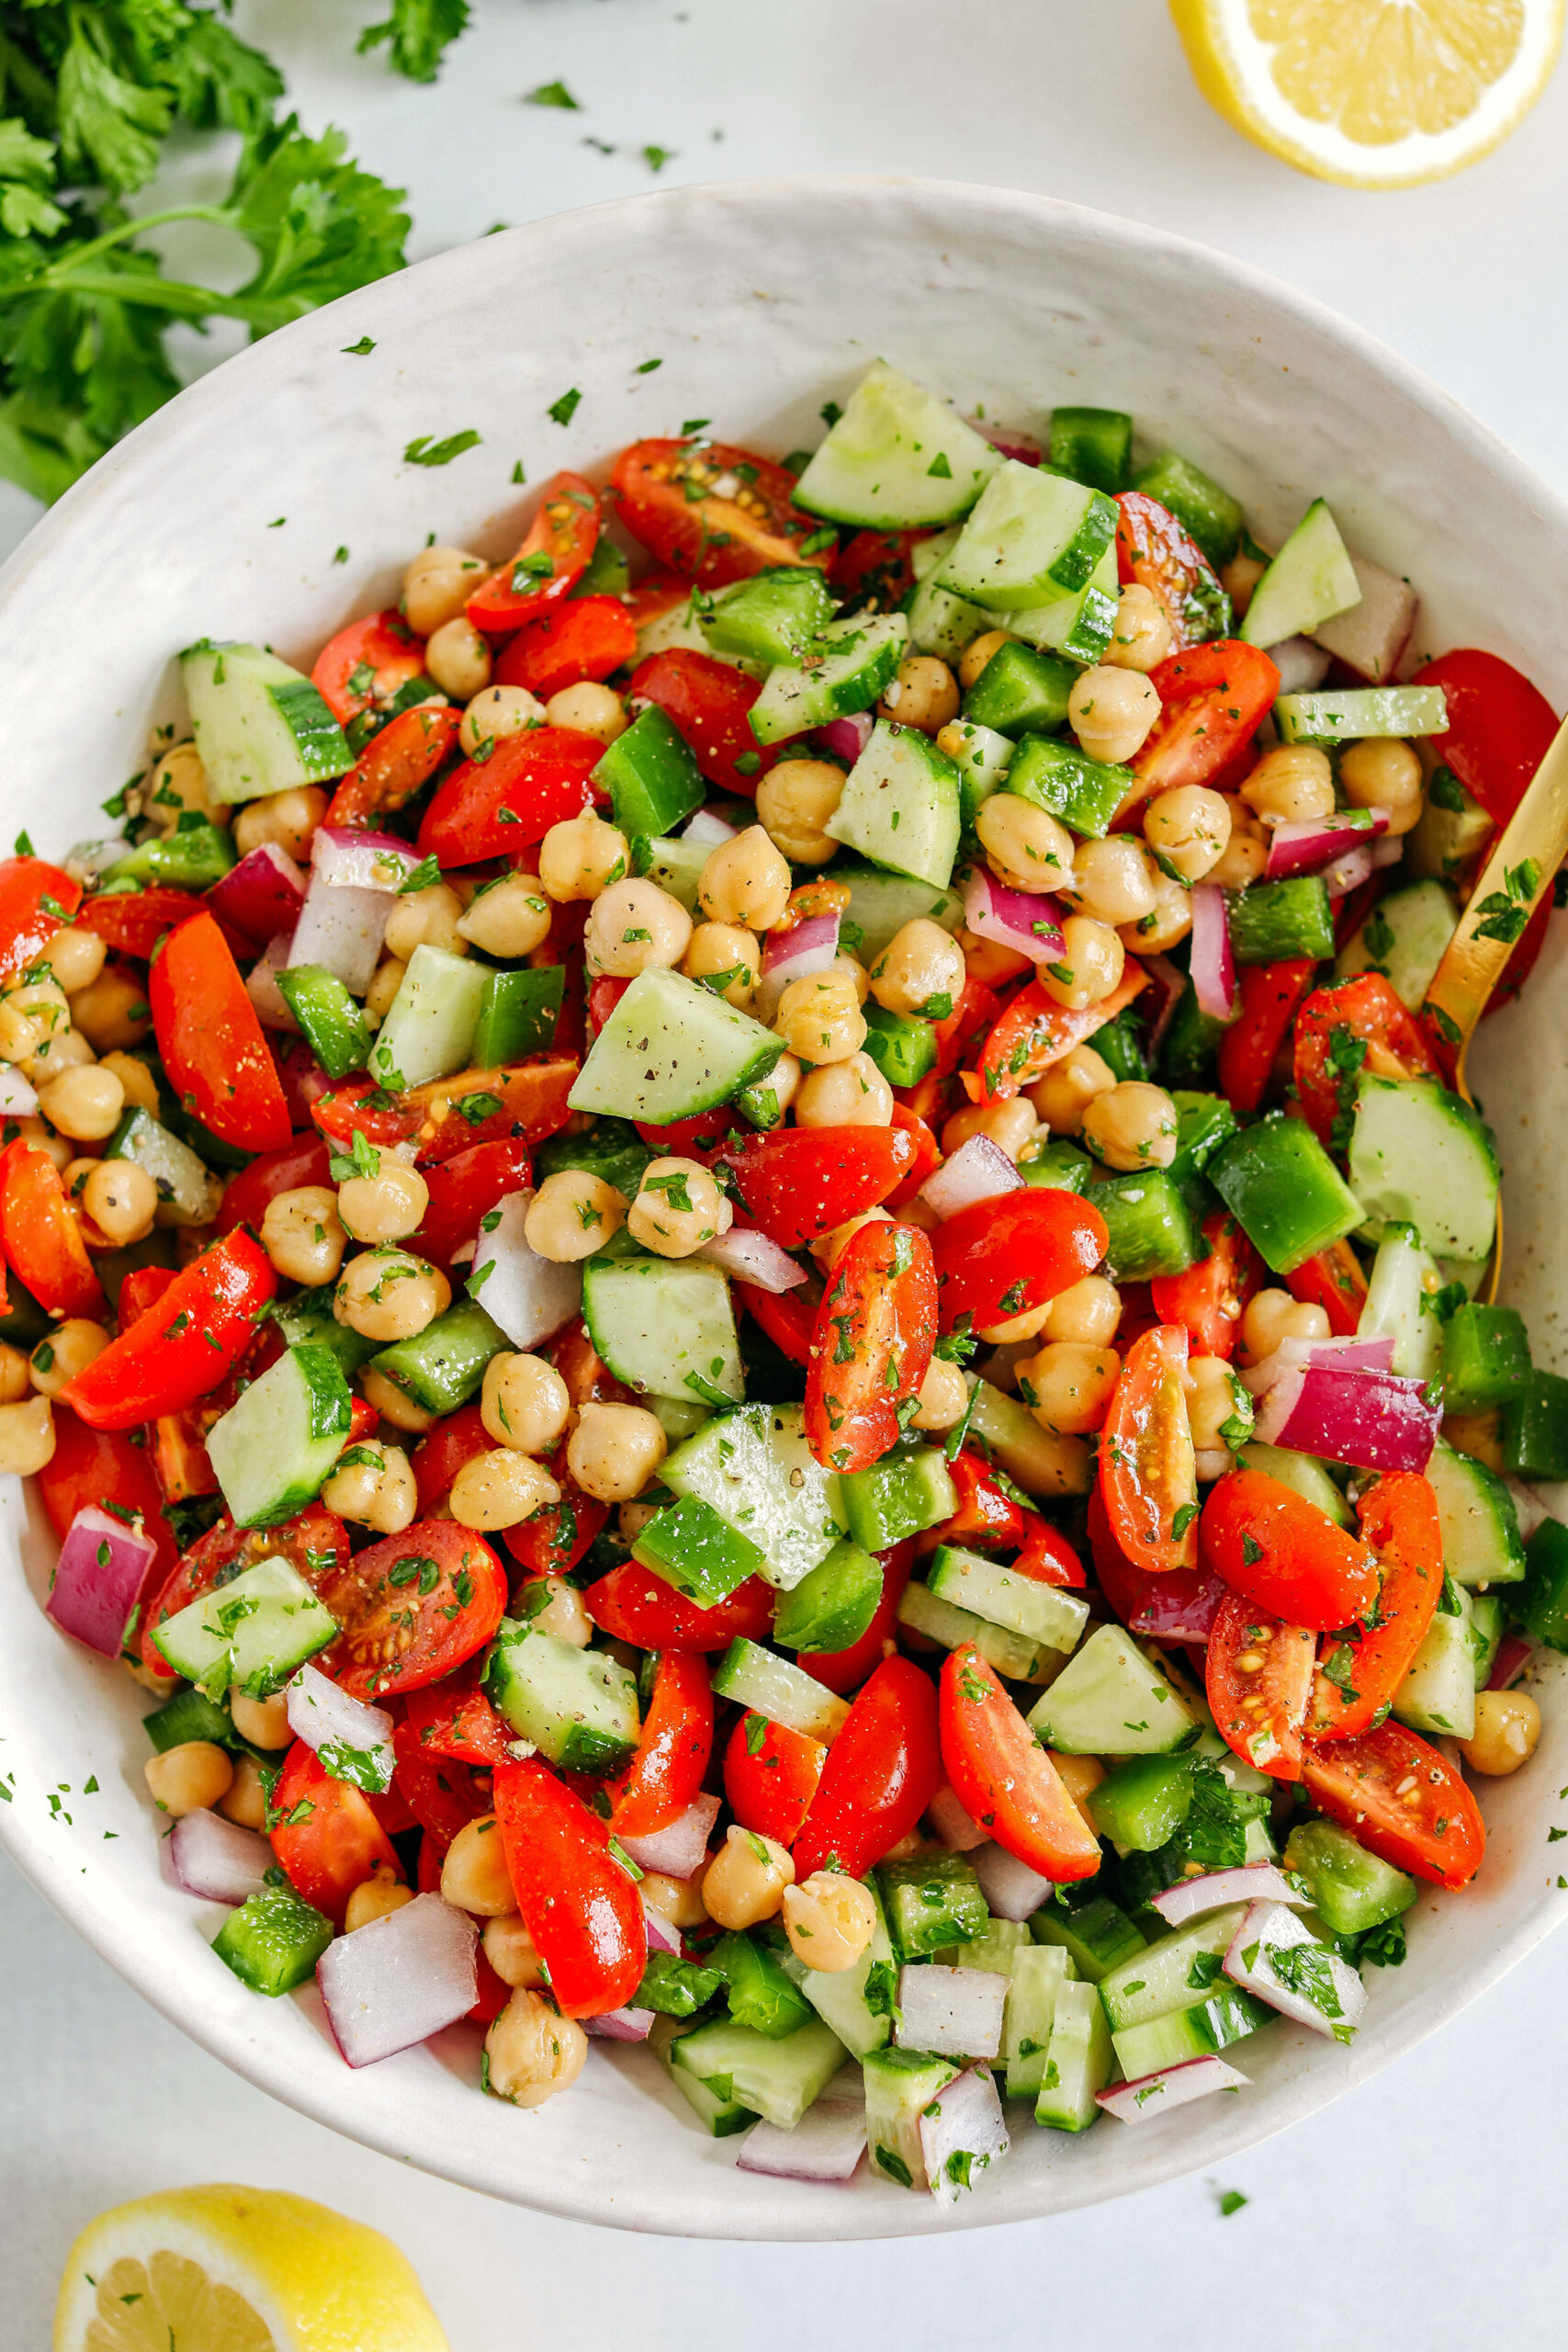 This Tomato, Cucumber and Chickpea Salad is a delicious summer staple made with fresh tomatoes, crisp cucumbers, chickpeas, red onion, and green bell pepper all tossed with a bright lemon vinaigrette!  Easy, healthy and the perfect side dish with grilled chicken, fish or steak!